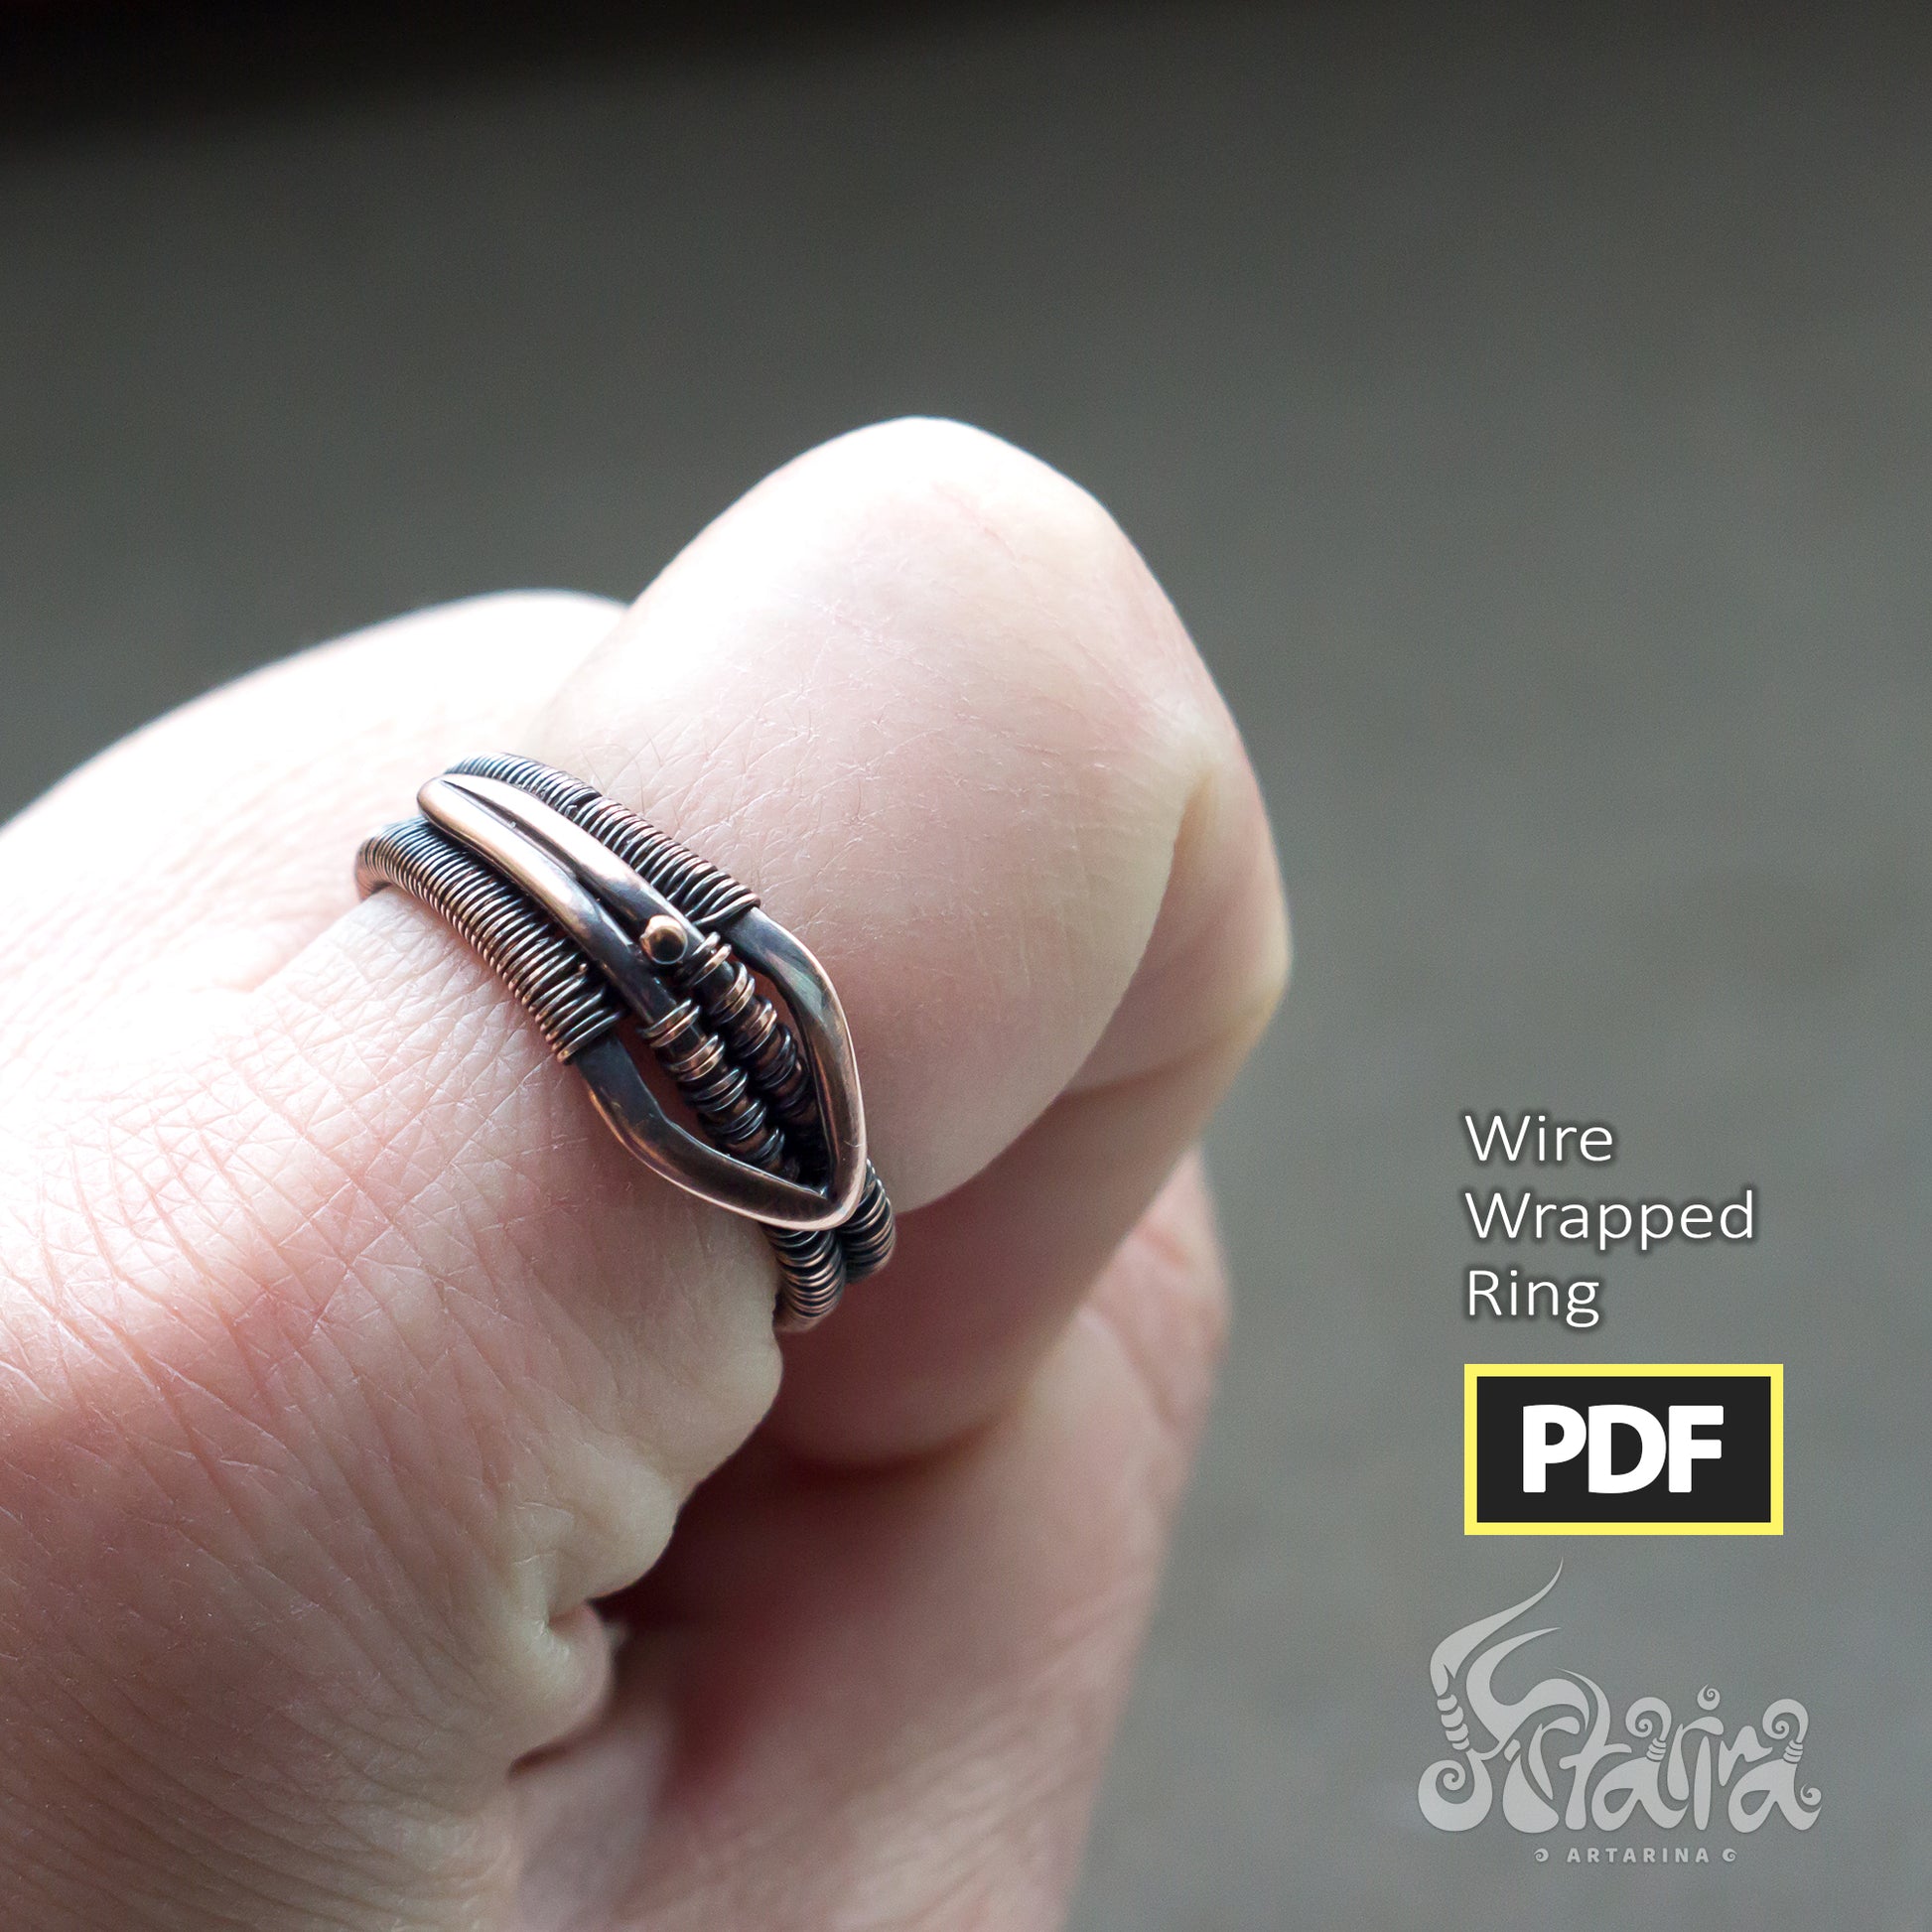 Wire wrapped handmade ring tutorial | Copper unique ring diy PDF | Wire wrap lessons | Unique ring by your hands